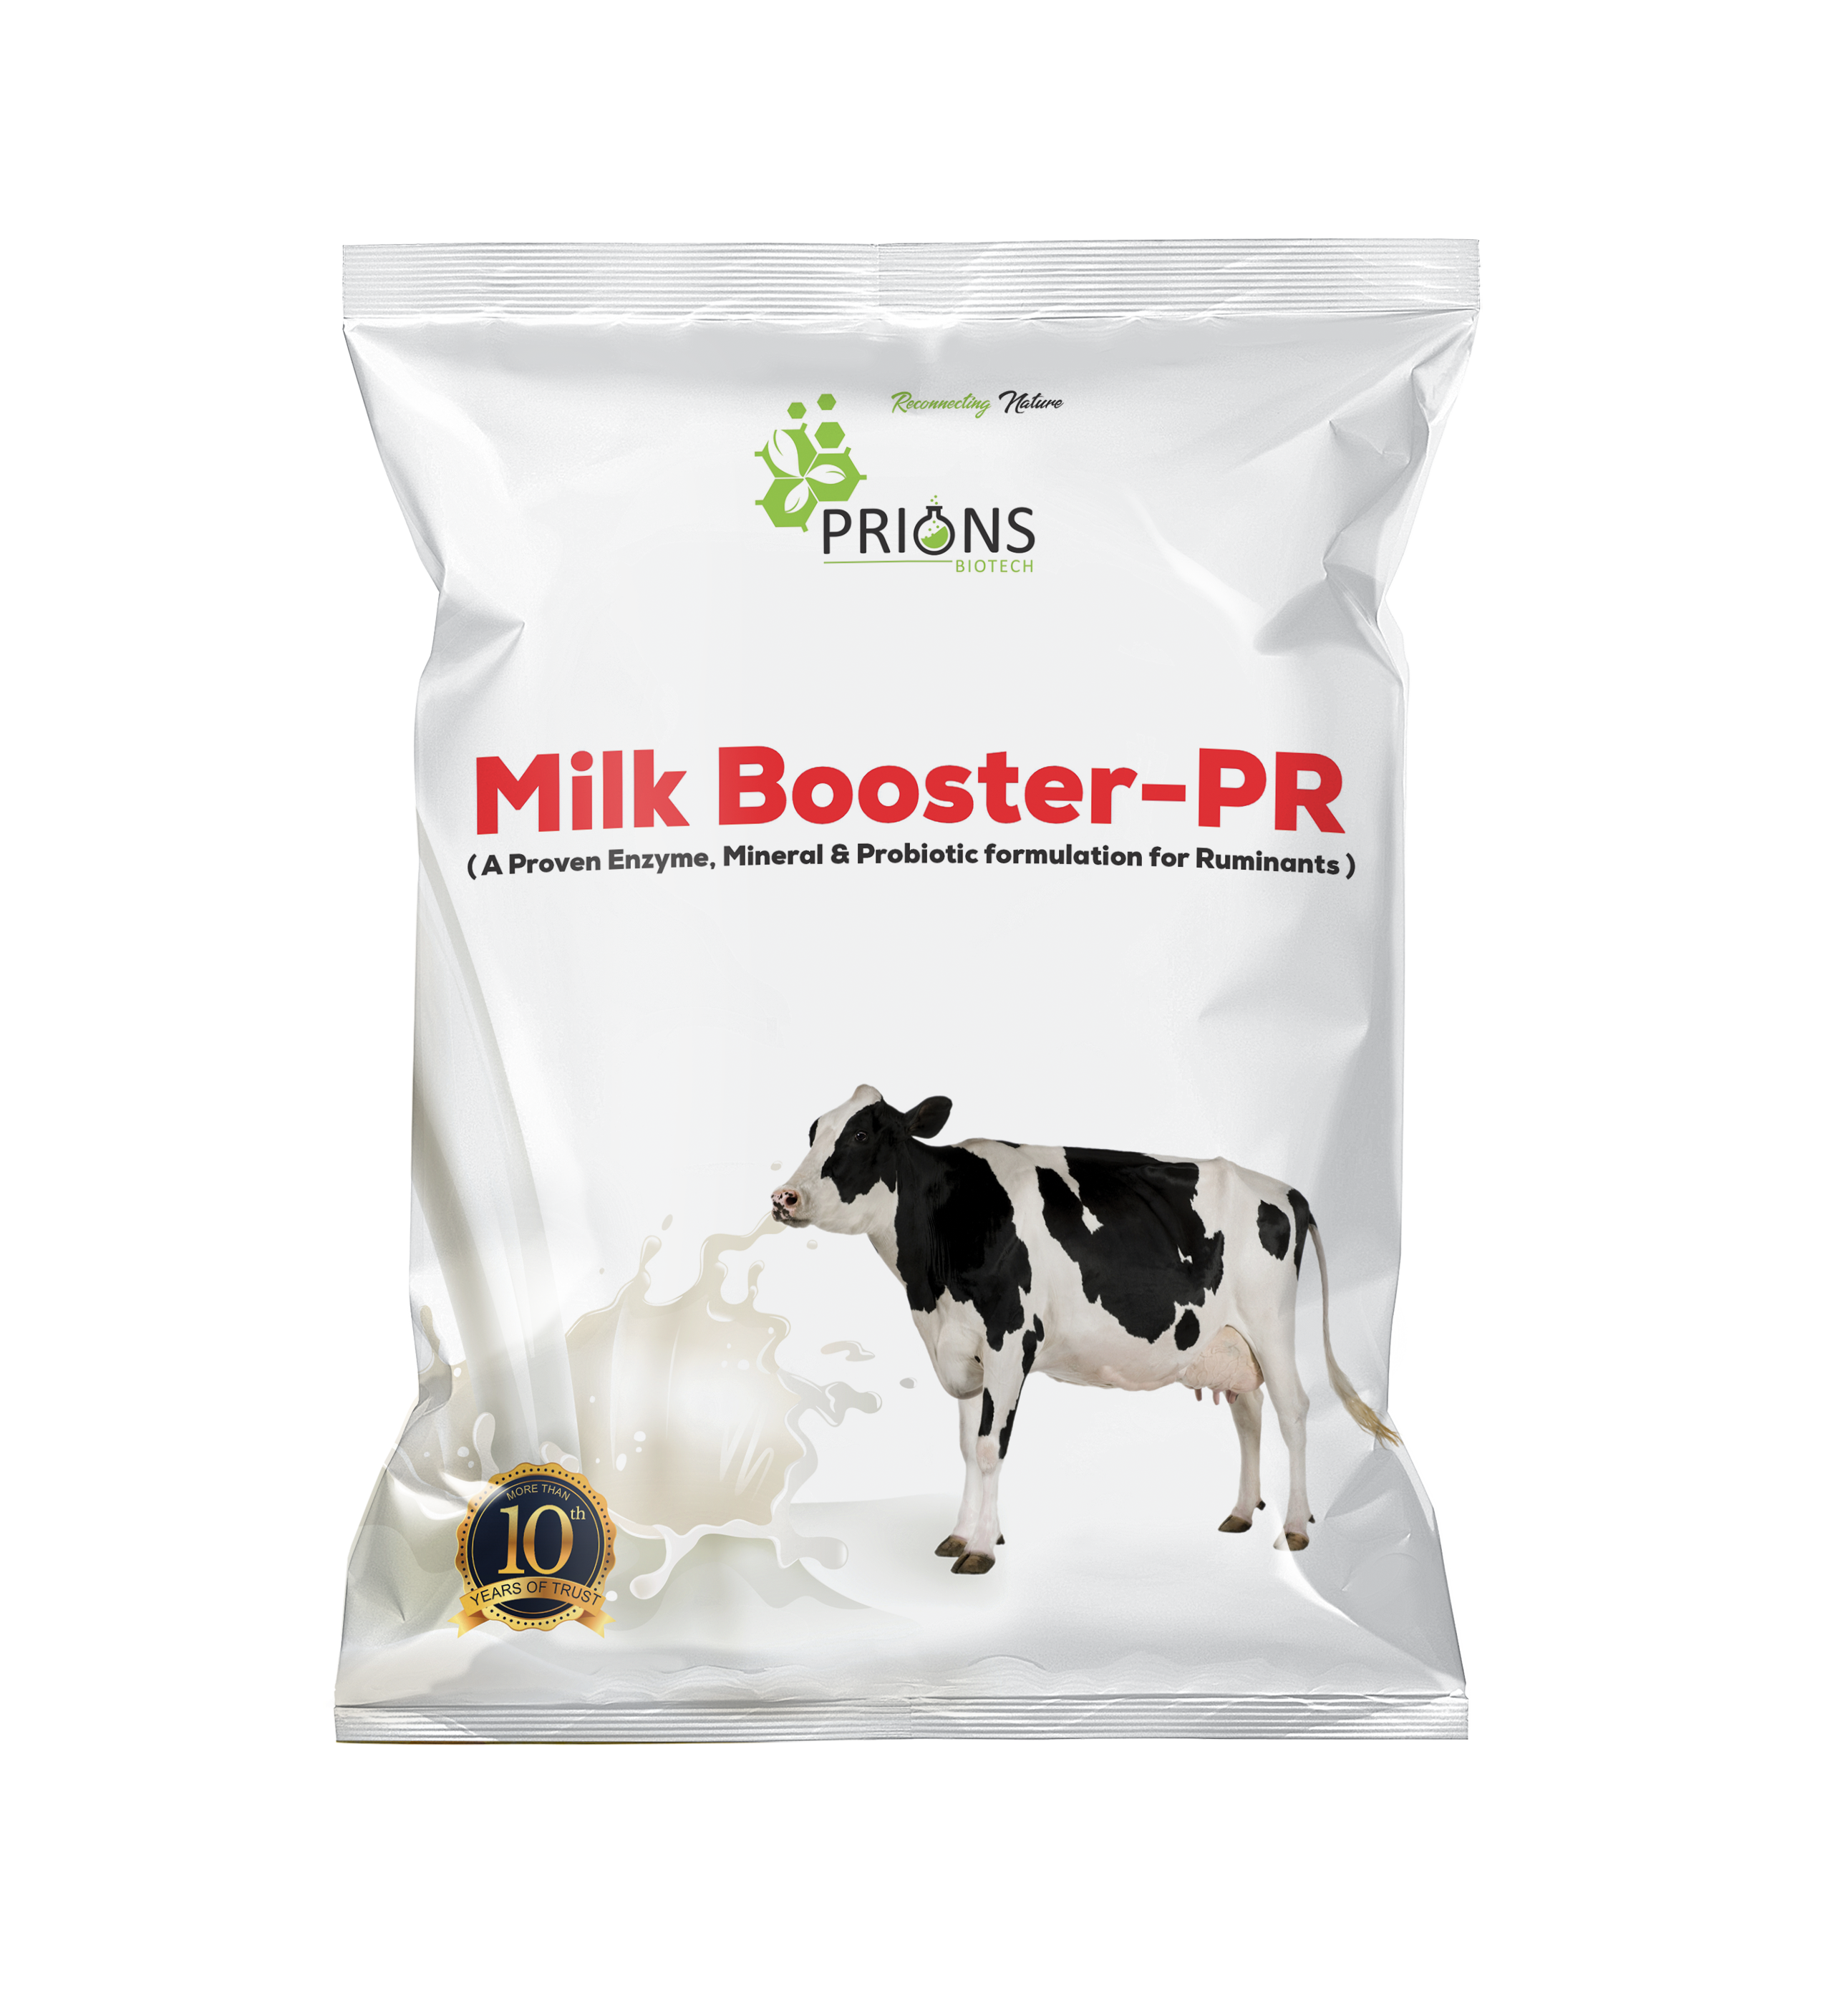 Enzyme, Mineral & Probiotic Formulation for Ruminants